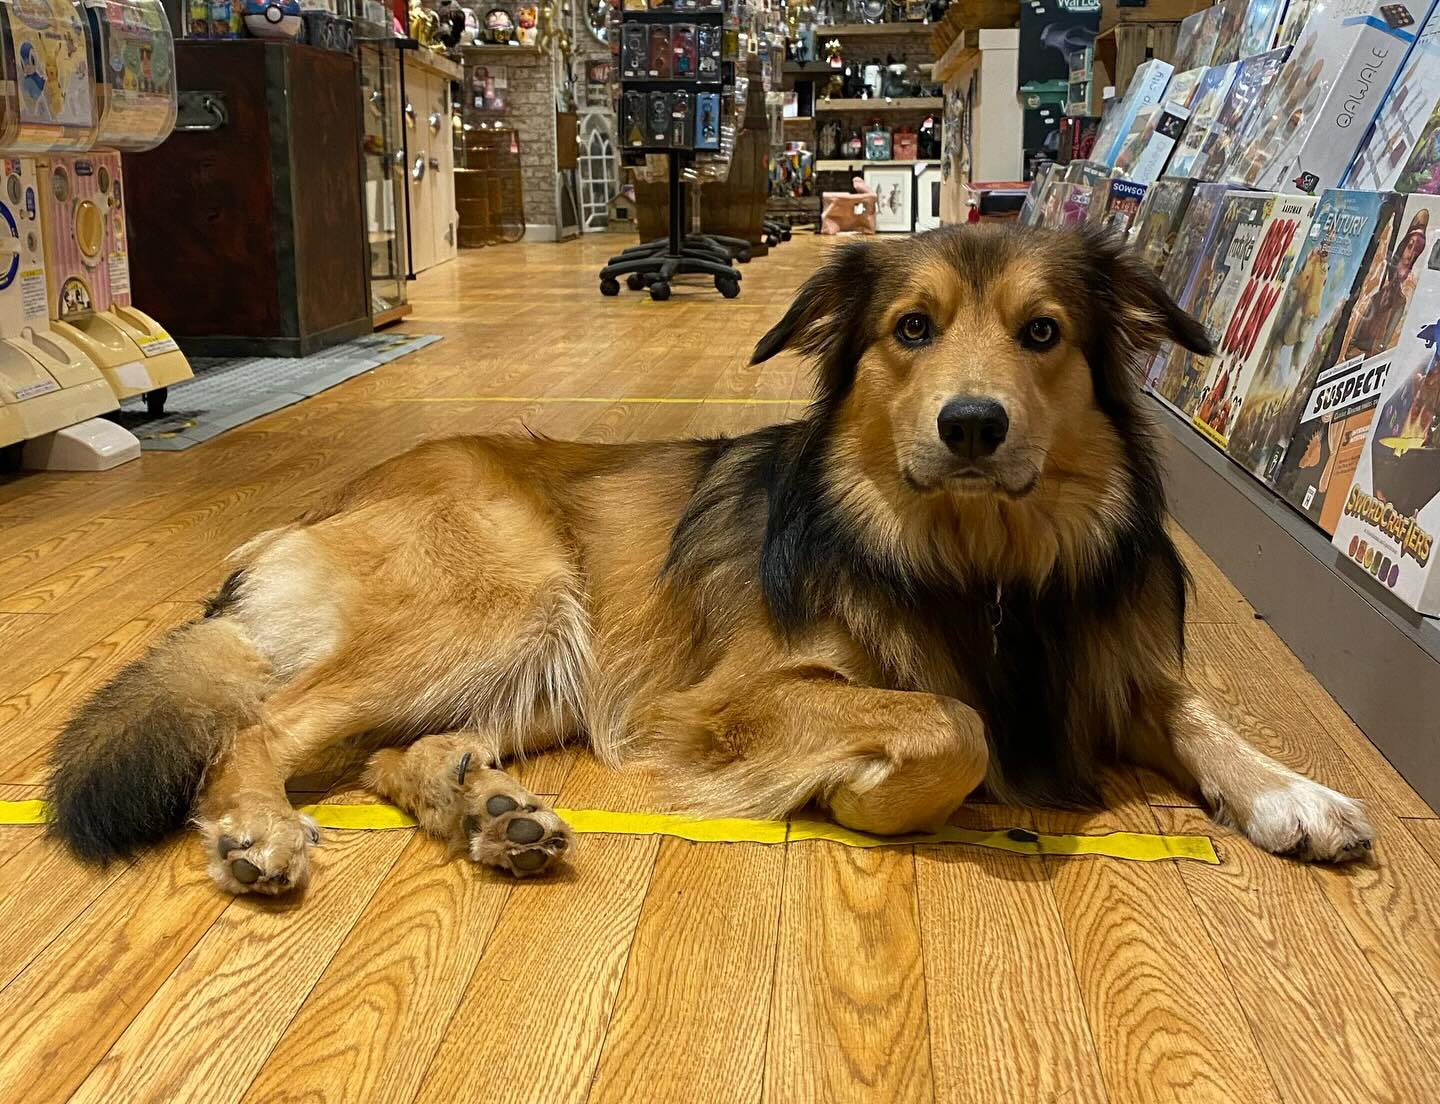 Toady the shop dog laying on the floor and looking at the camera at the Happy Piranha store in Truro, Cornwall.